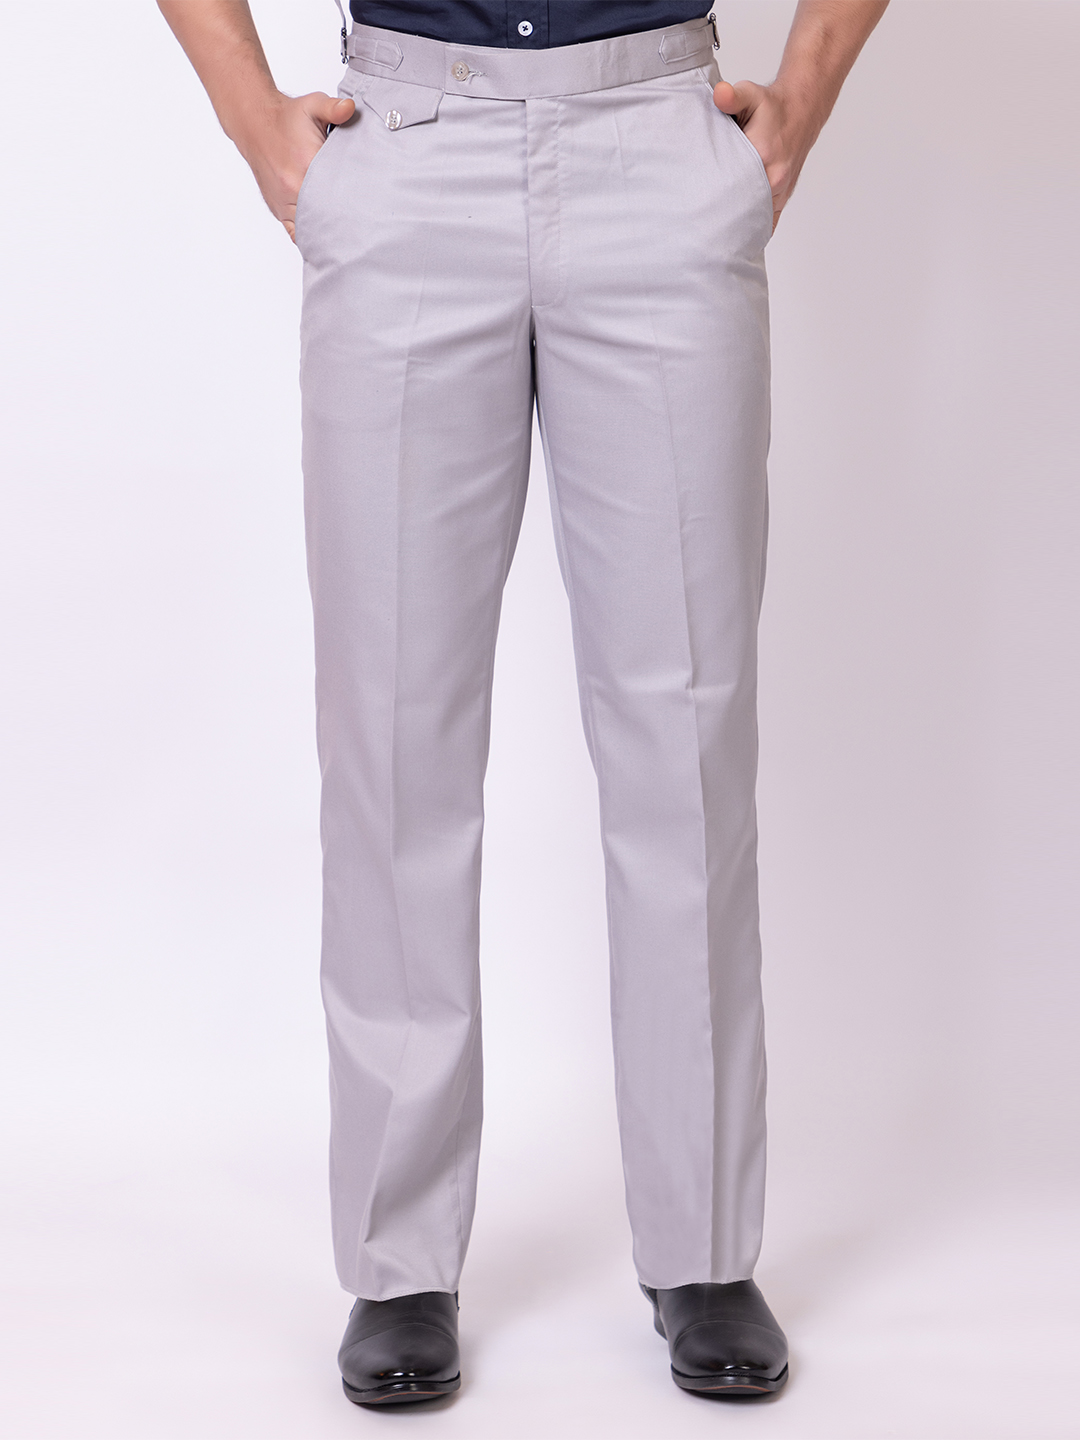 Buy Men Grey Slim Fit Textured Flat Front Formal Trousers Online - 744839 |  Louis Philippe